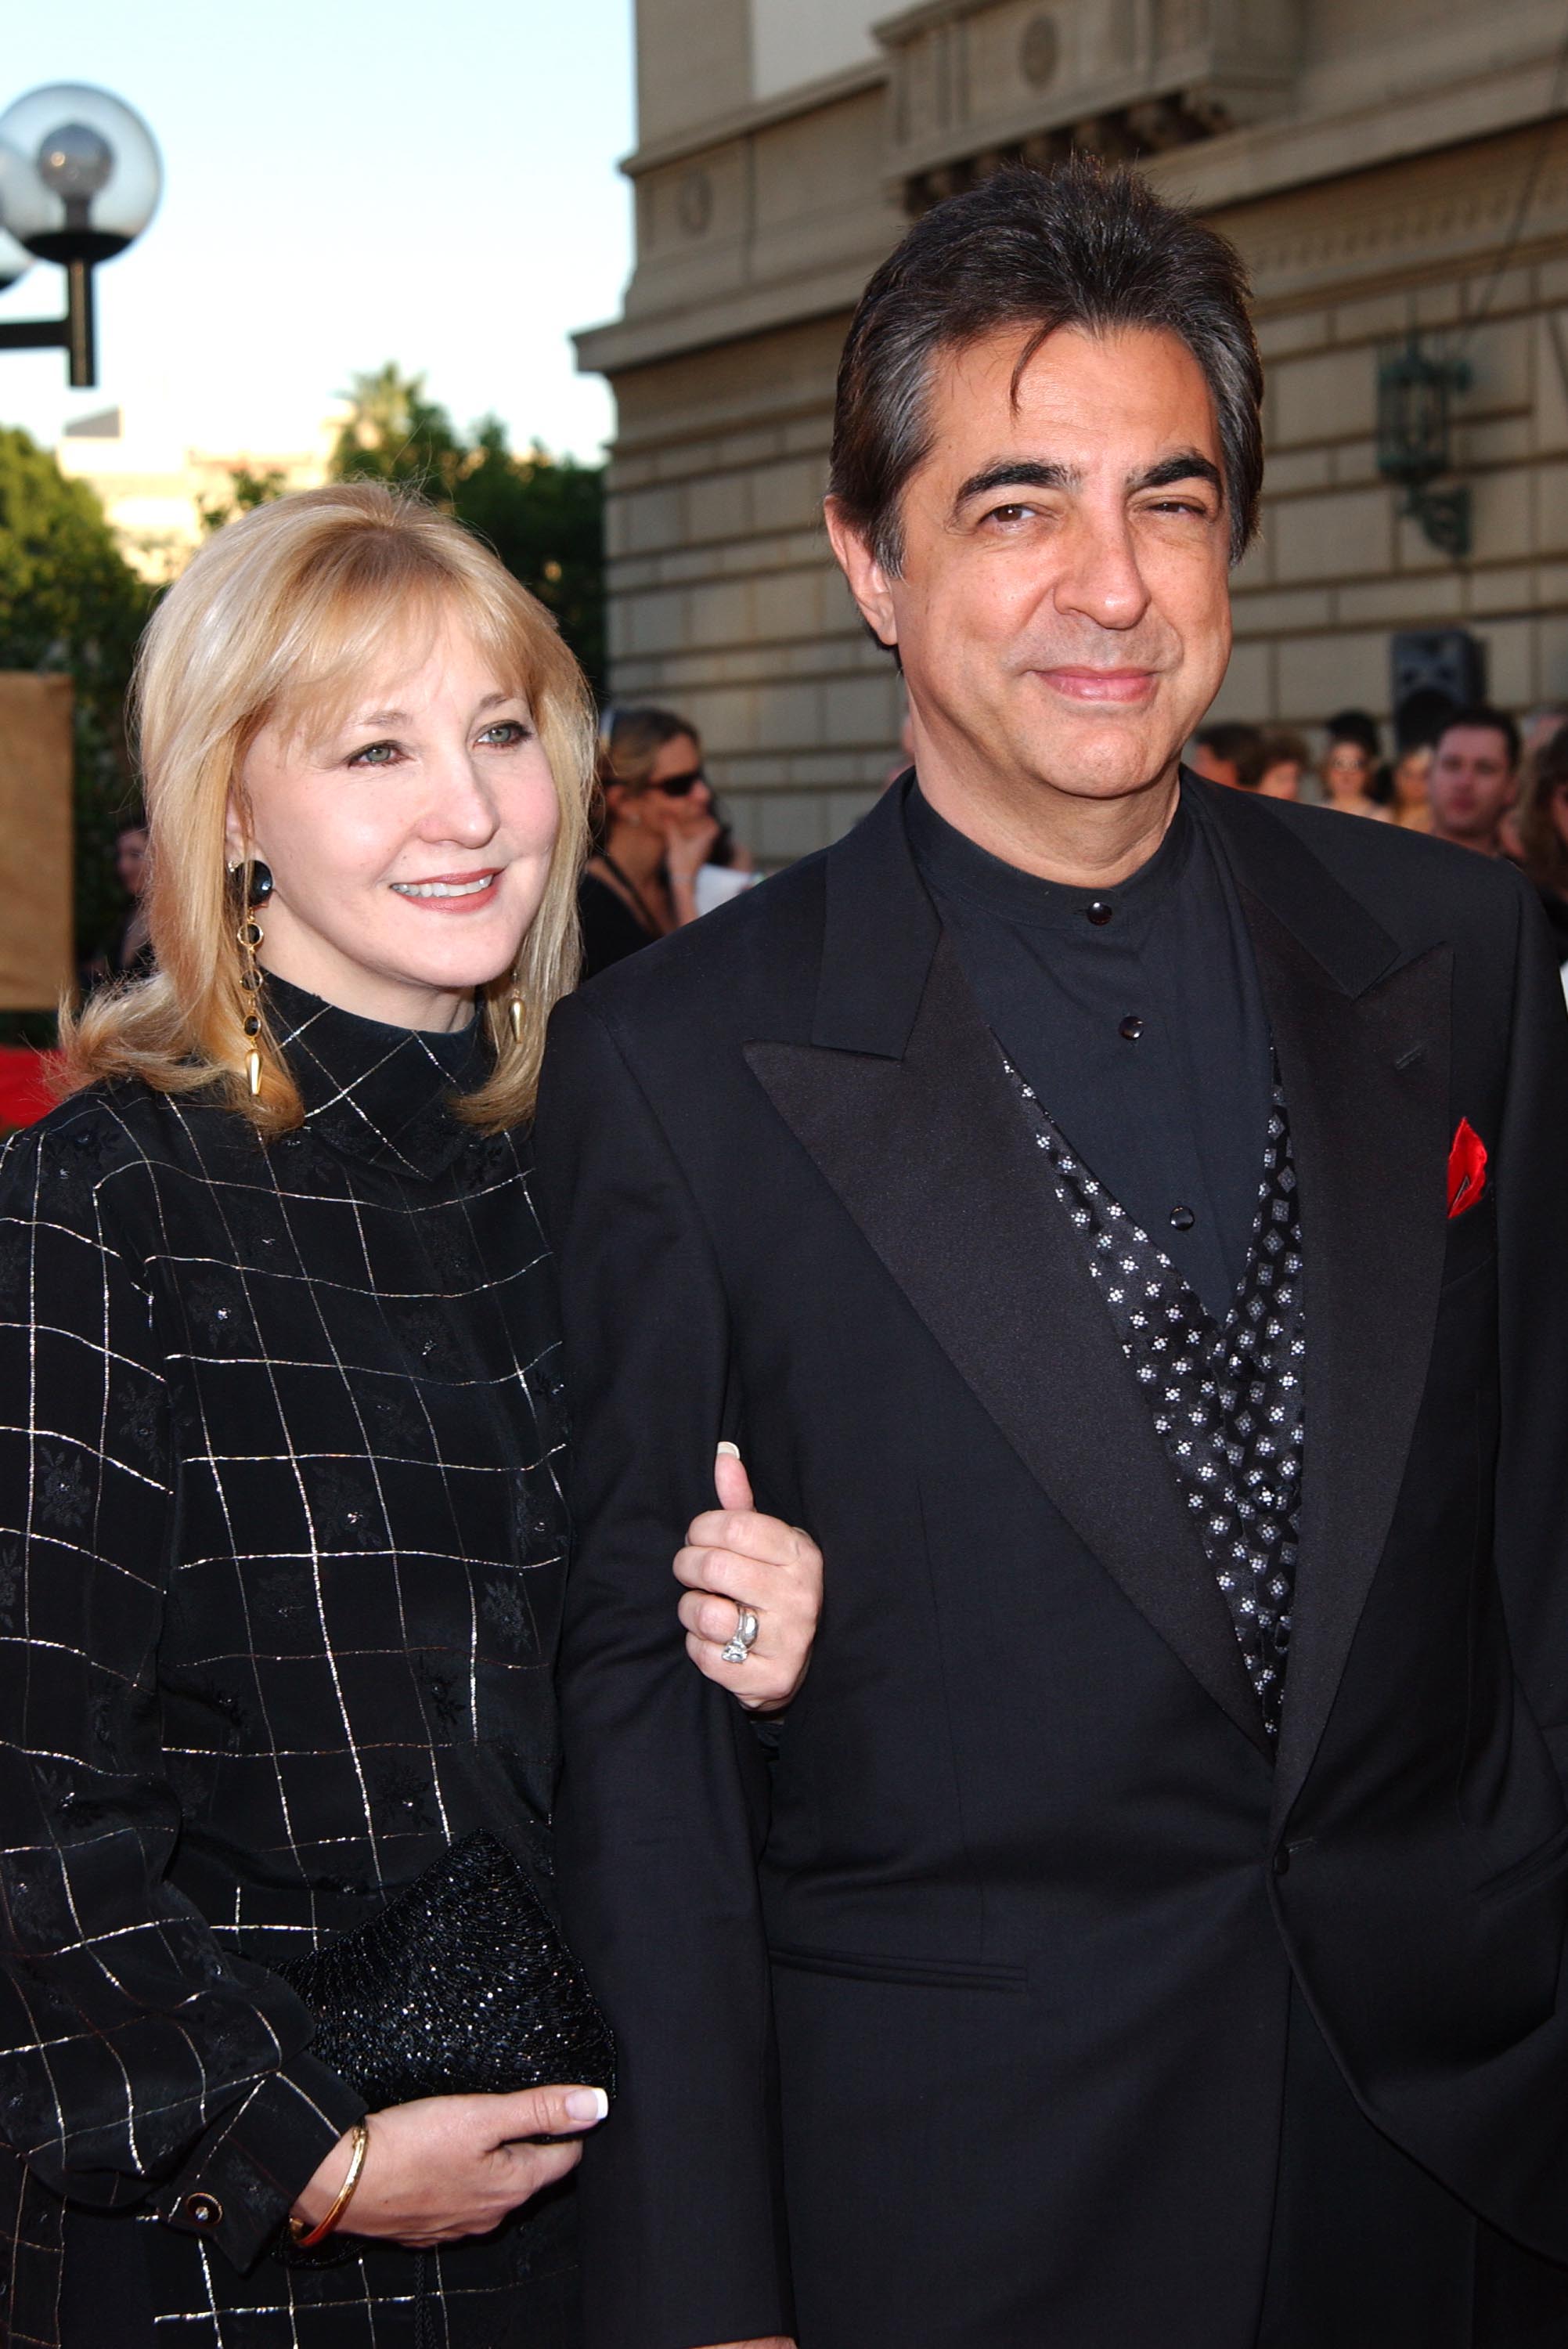 Arlene Vhrel and Joe Mantegna at the 30th Annual People's Choice Awards in Pasadena, California in 2004 | Source: Getty Images